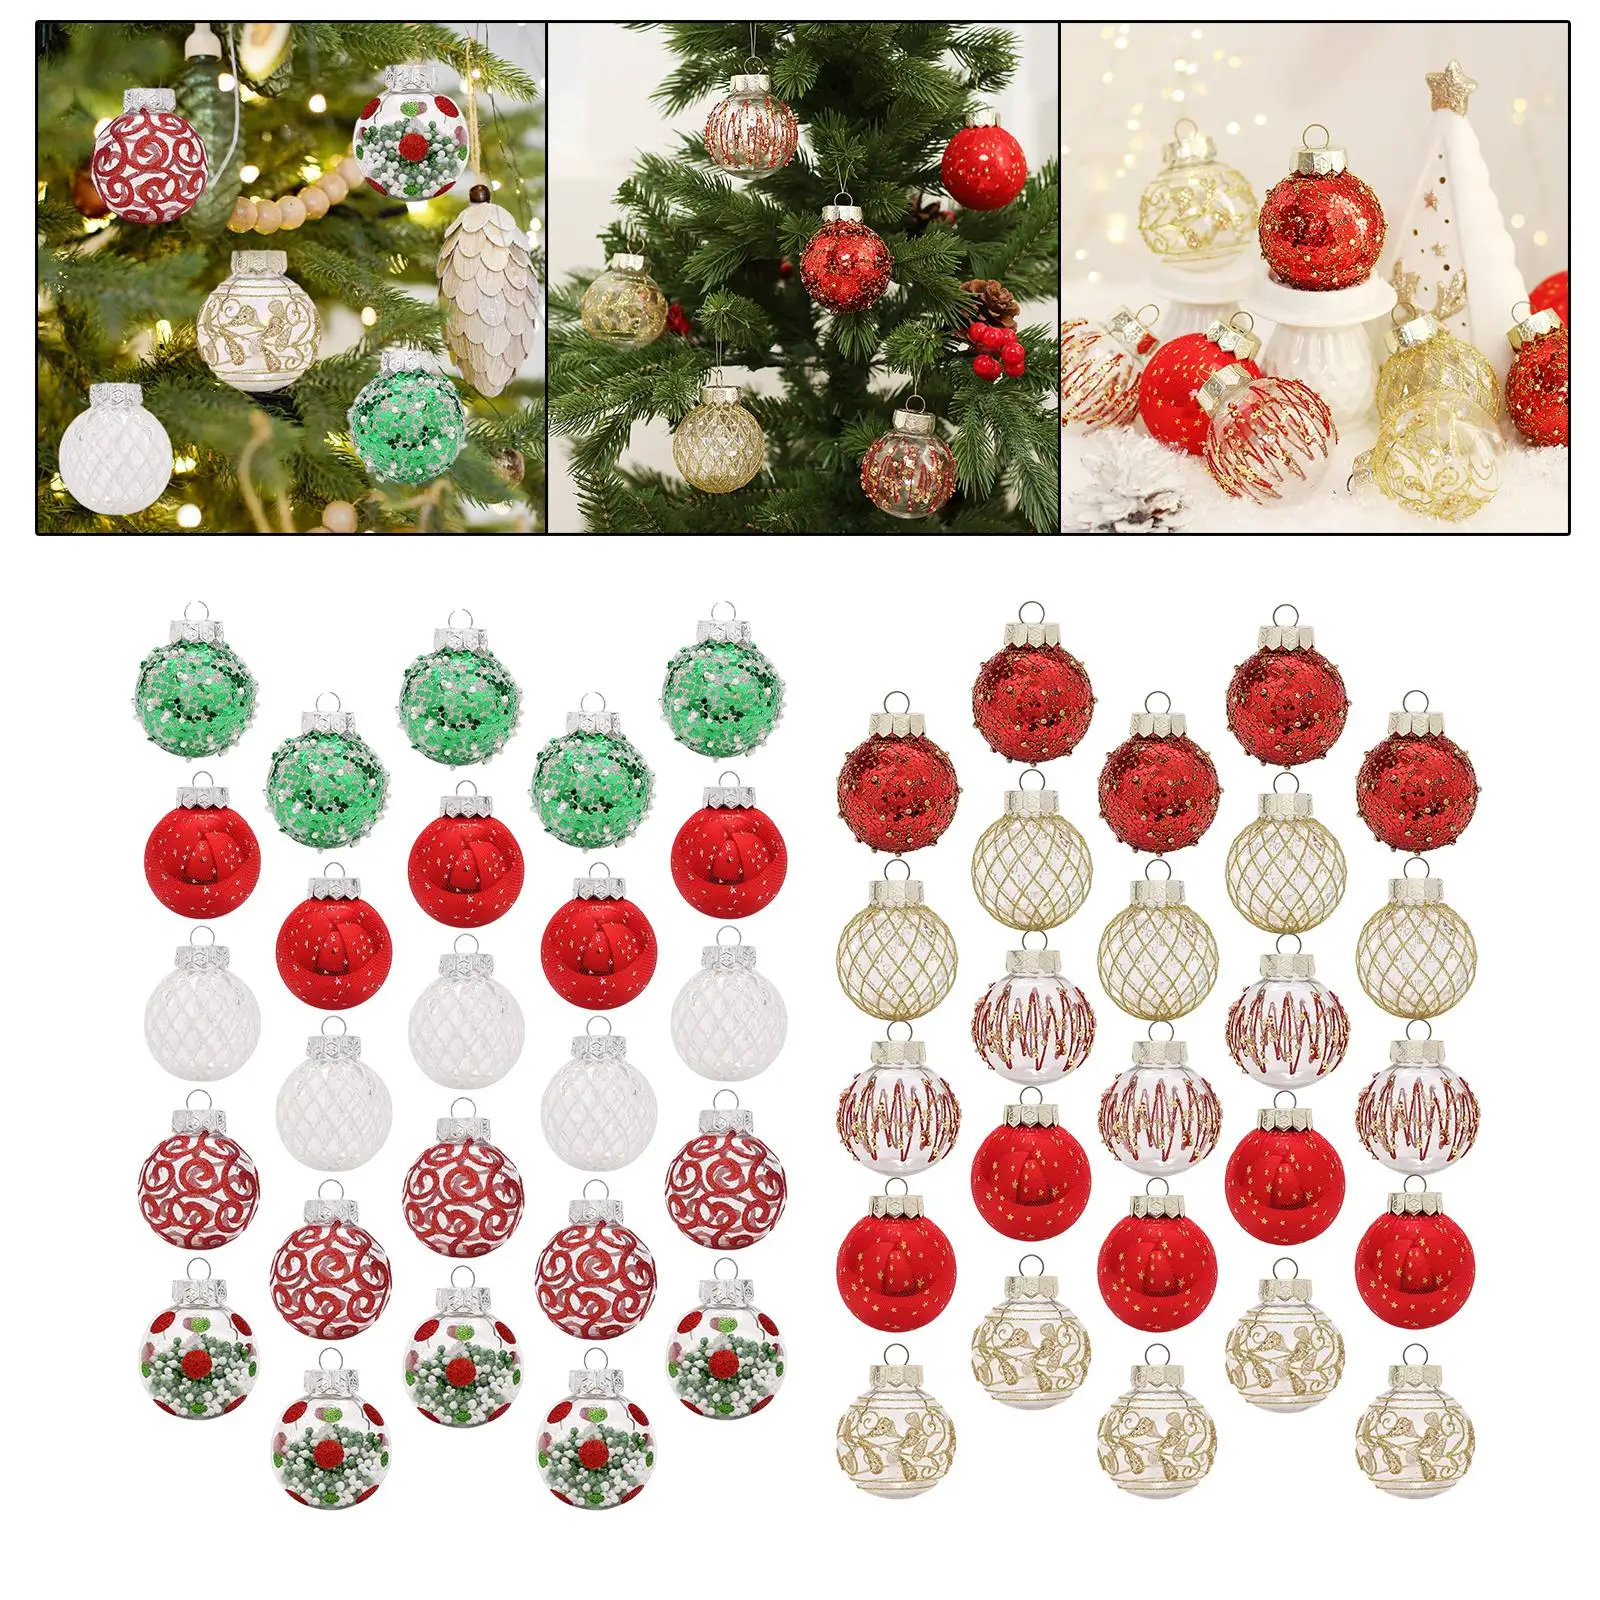 25 Pieces Christmas Ball Ornaments Christmas Tree Decorations for Ceiling